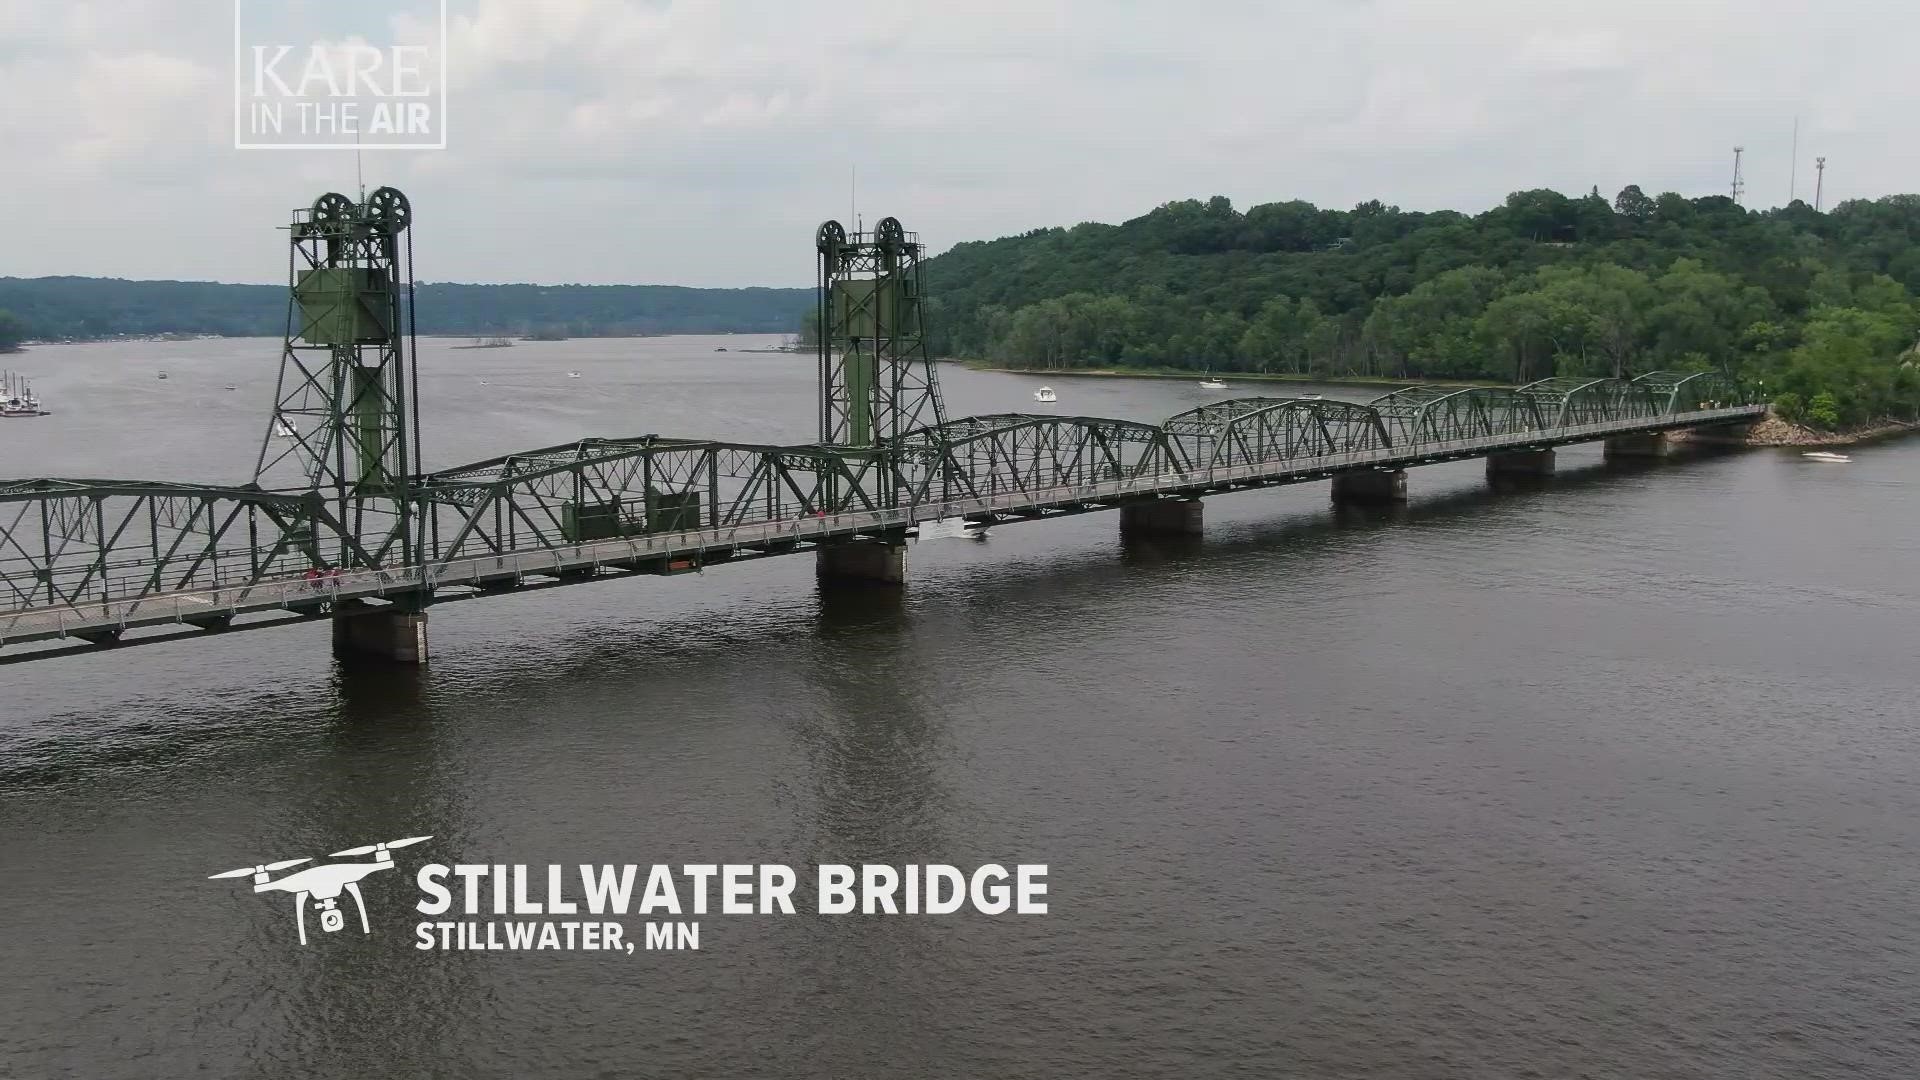 Our summer drone series takes us above the oft-observed and photographed span that takes walkers and bikers across the St. Croix River.